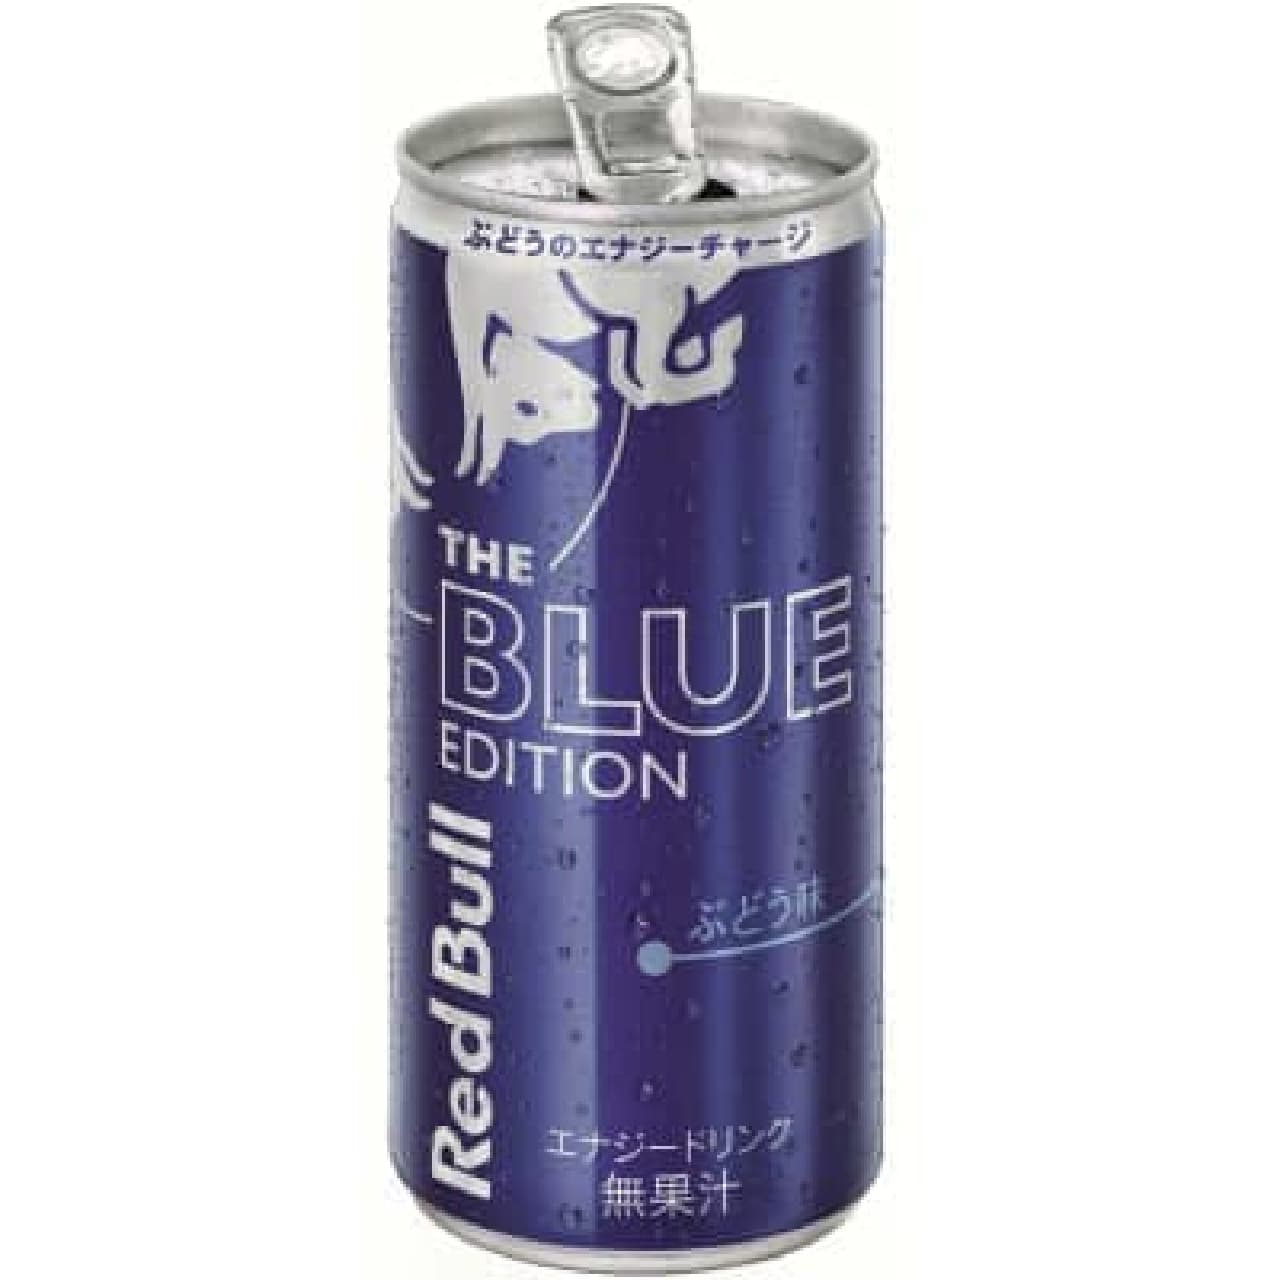 Grape-flavored Red Bull is here!